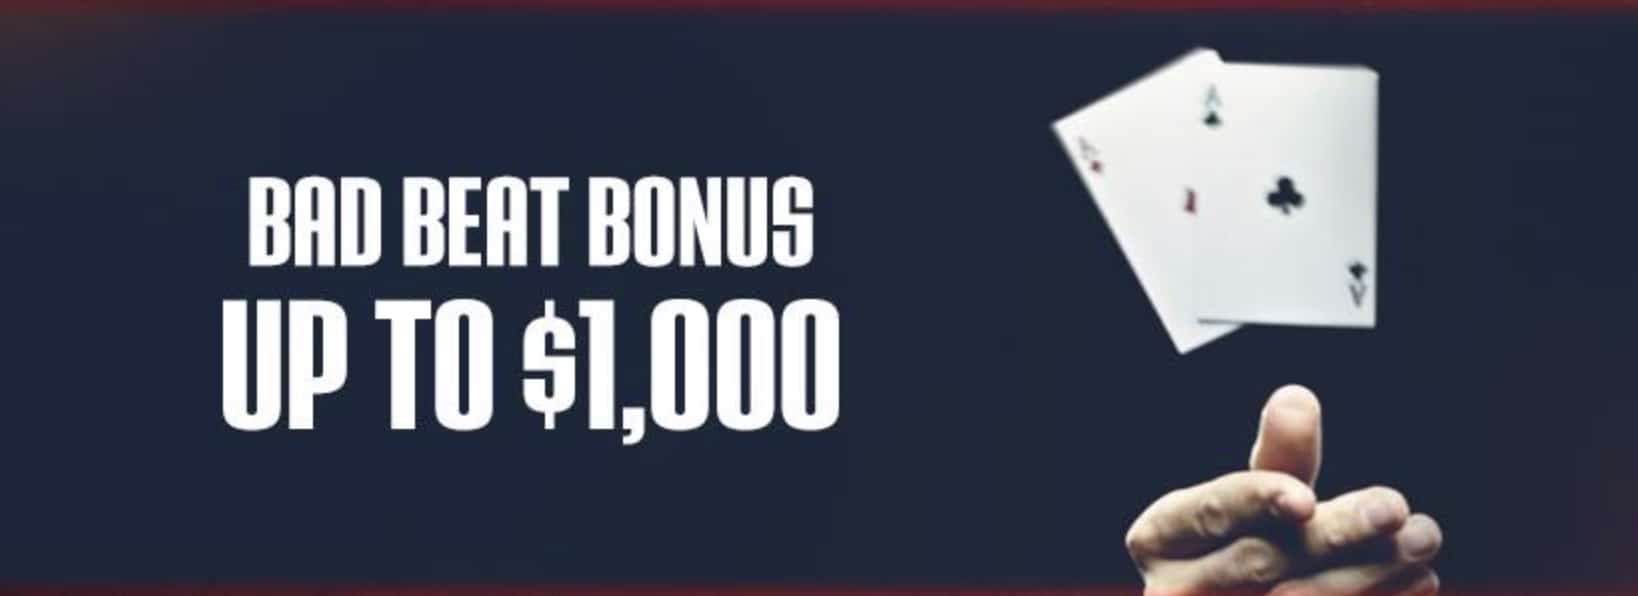 A screenshot of the Bad Beat bonus banner ad on the Ignition Casino promotions page